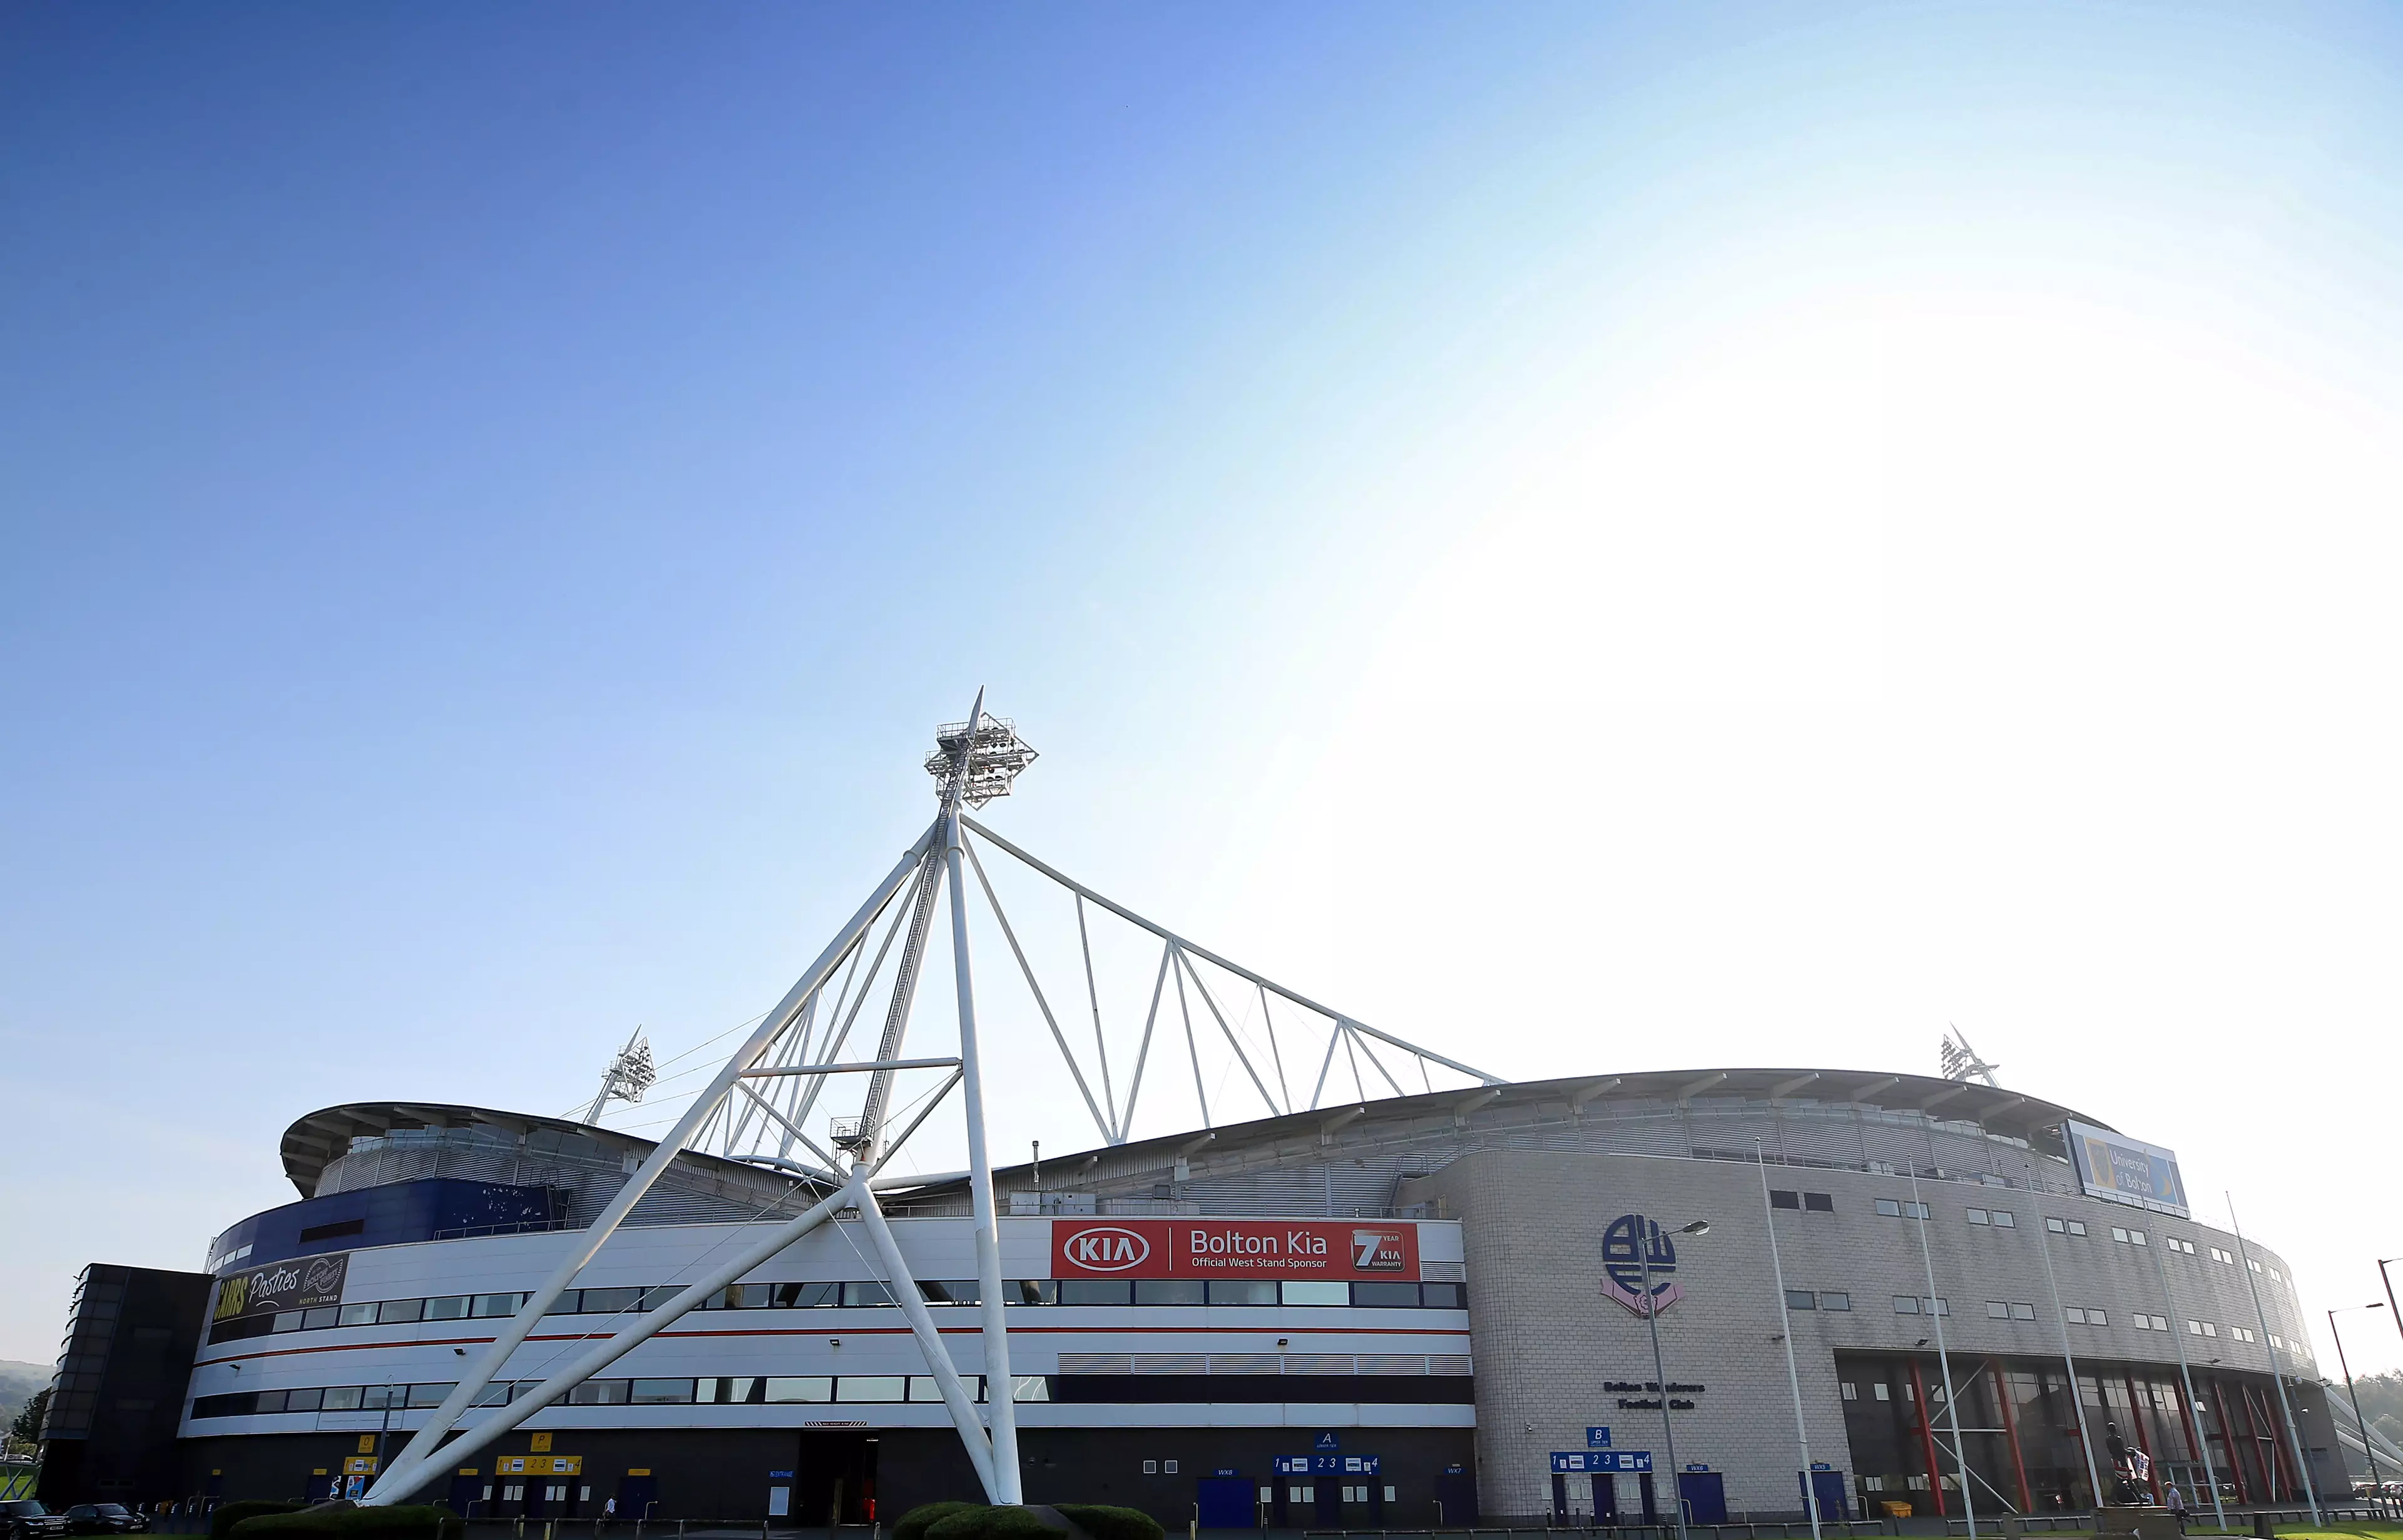 Bolton have fought off the threat of expulsion. Image: PA Images